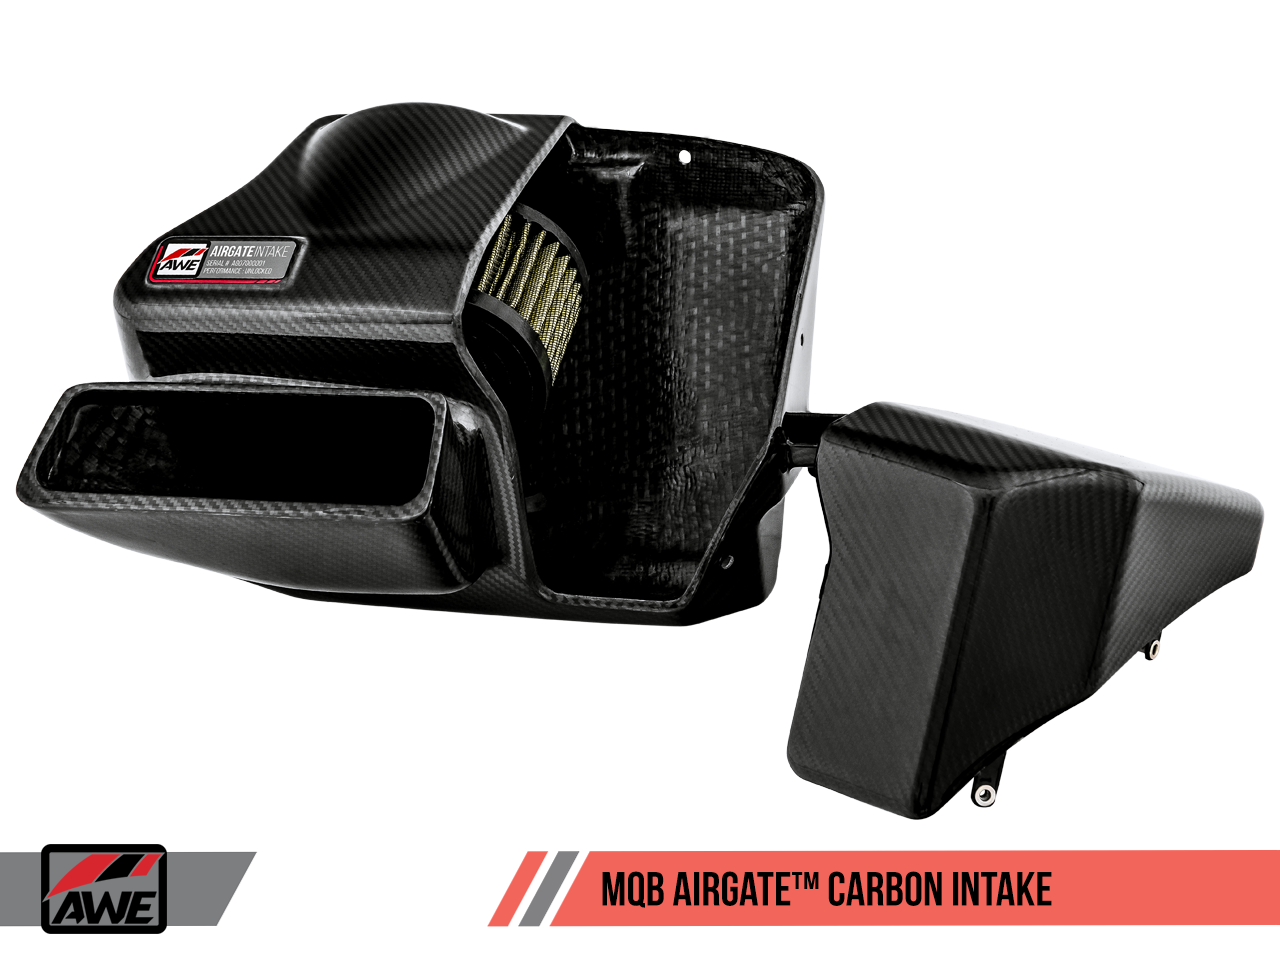 AWE AirGate™ Carbon Intake for Audi / VW MQB (1.8T / 2.0T) - With Lid